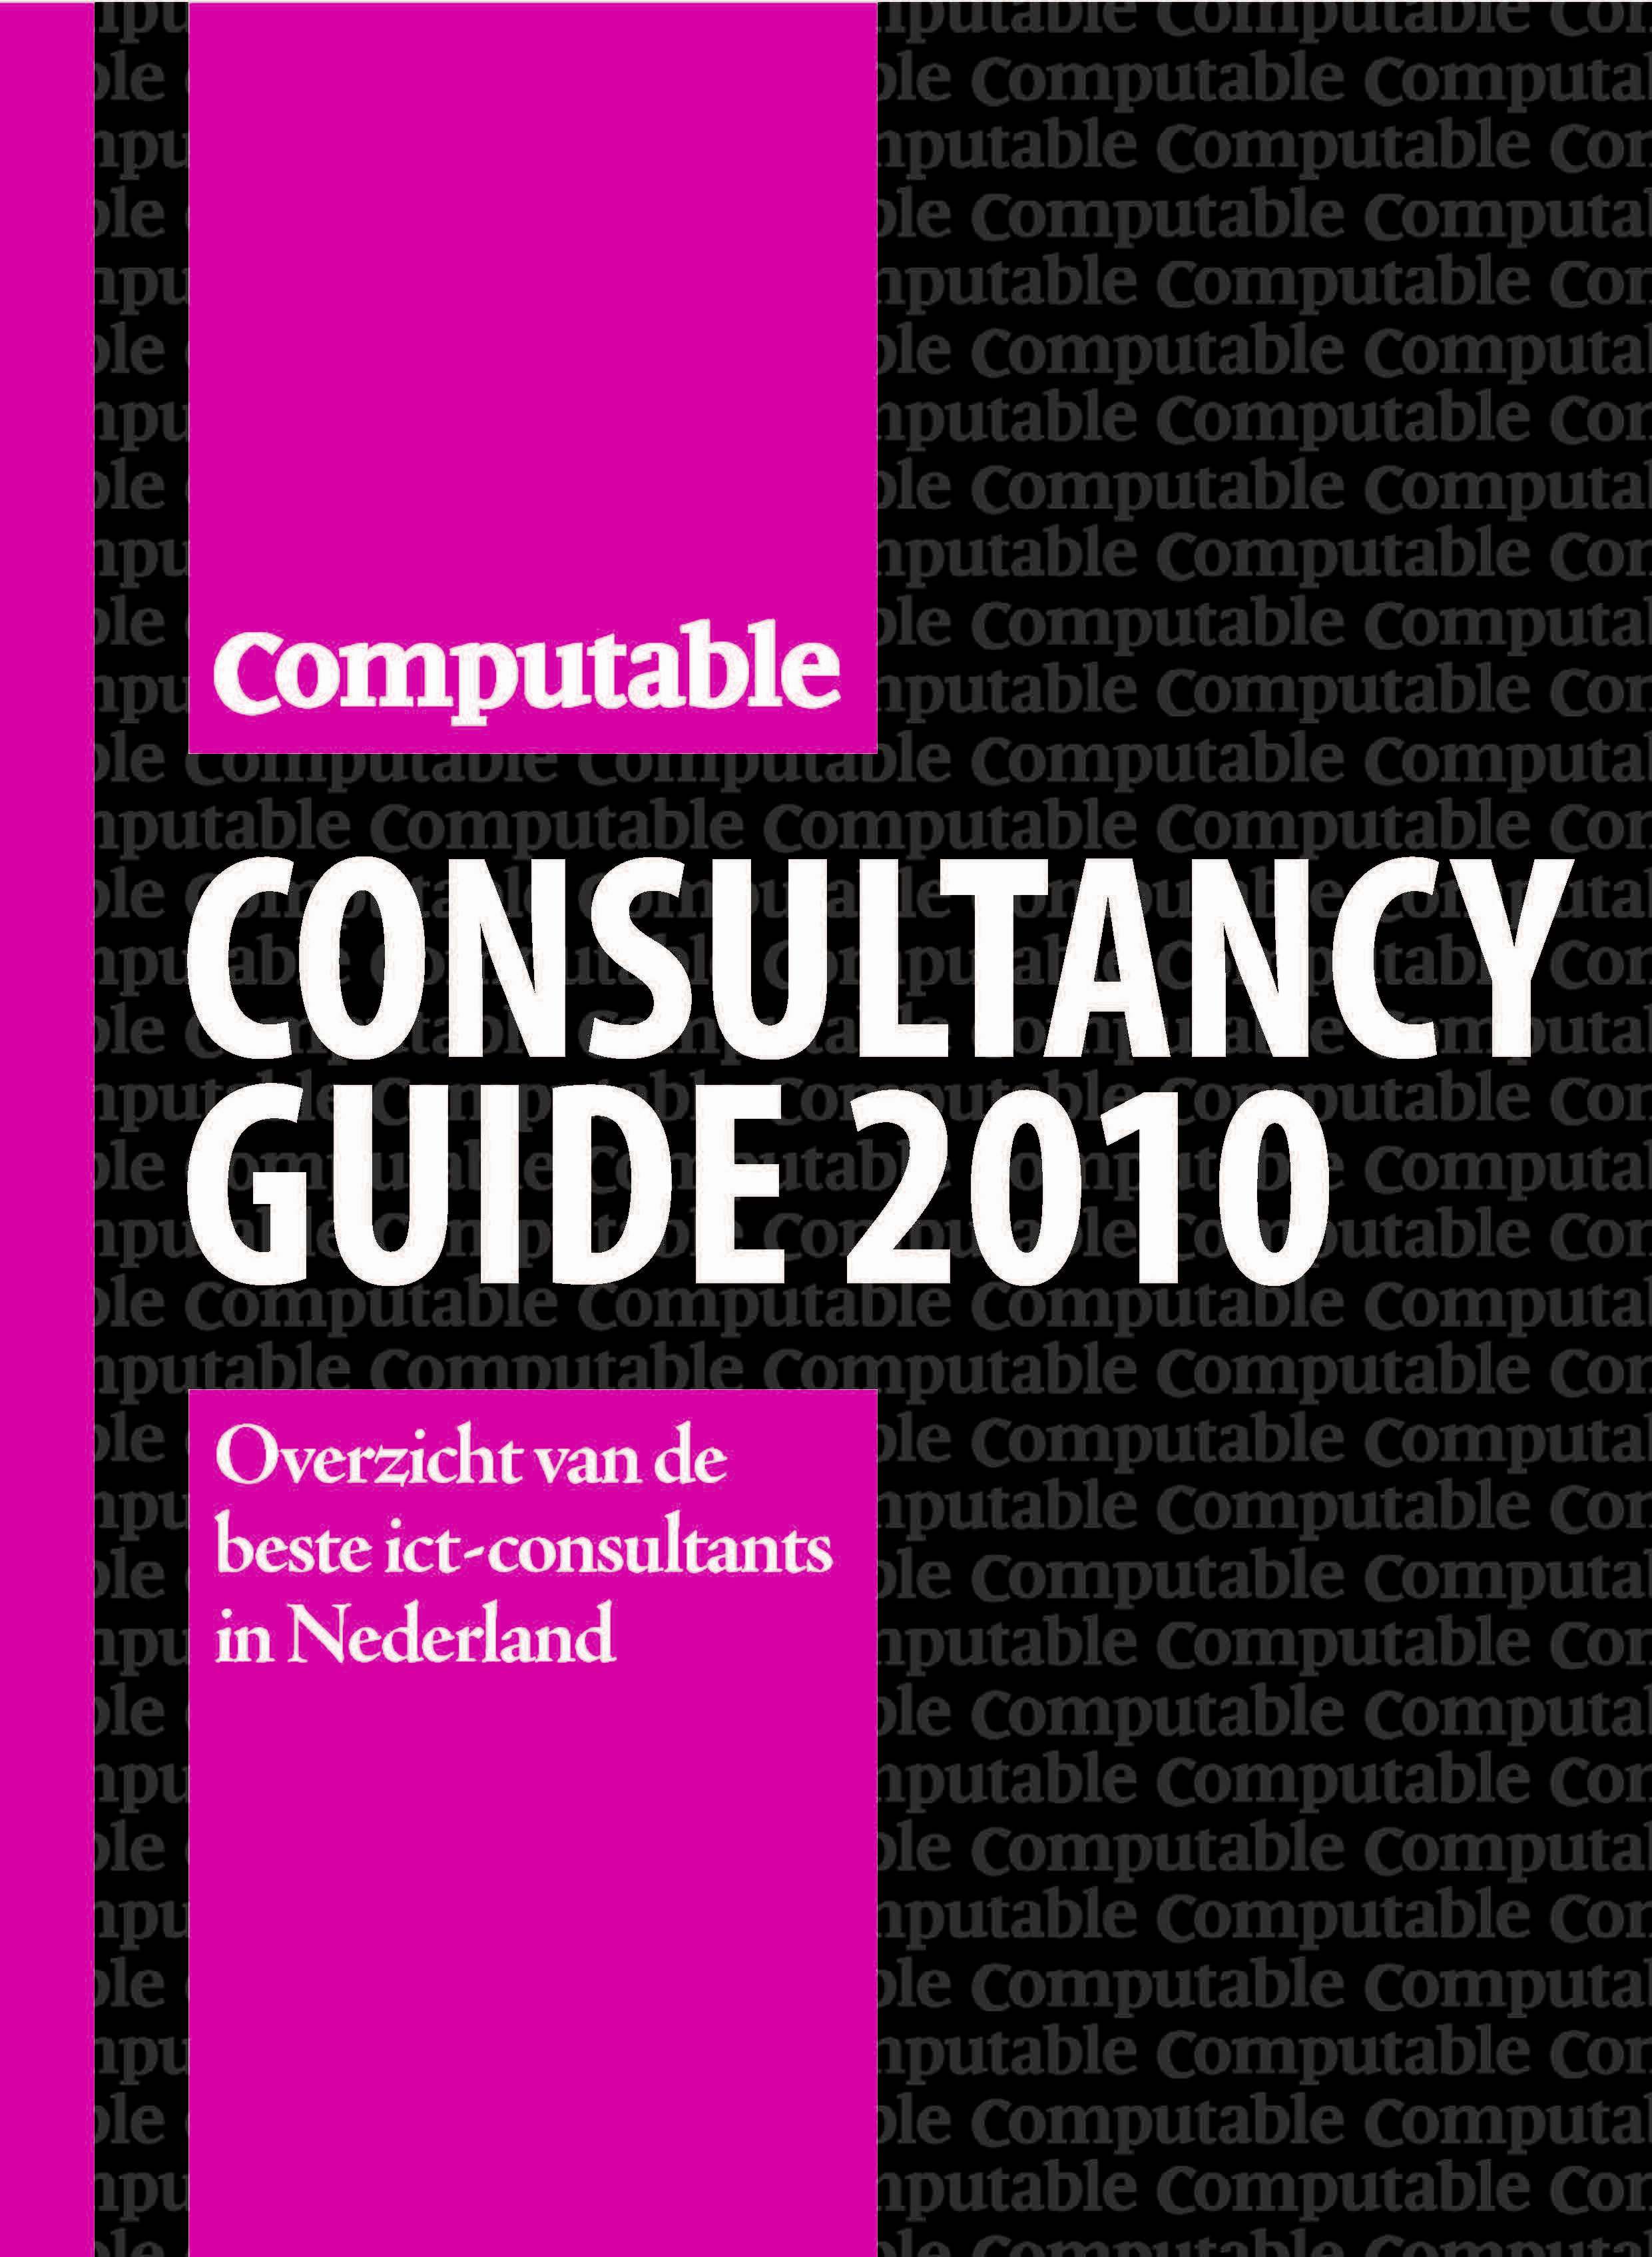 Computable ICT Consultancy Guide – 2010